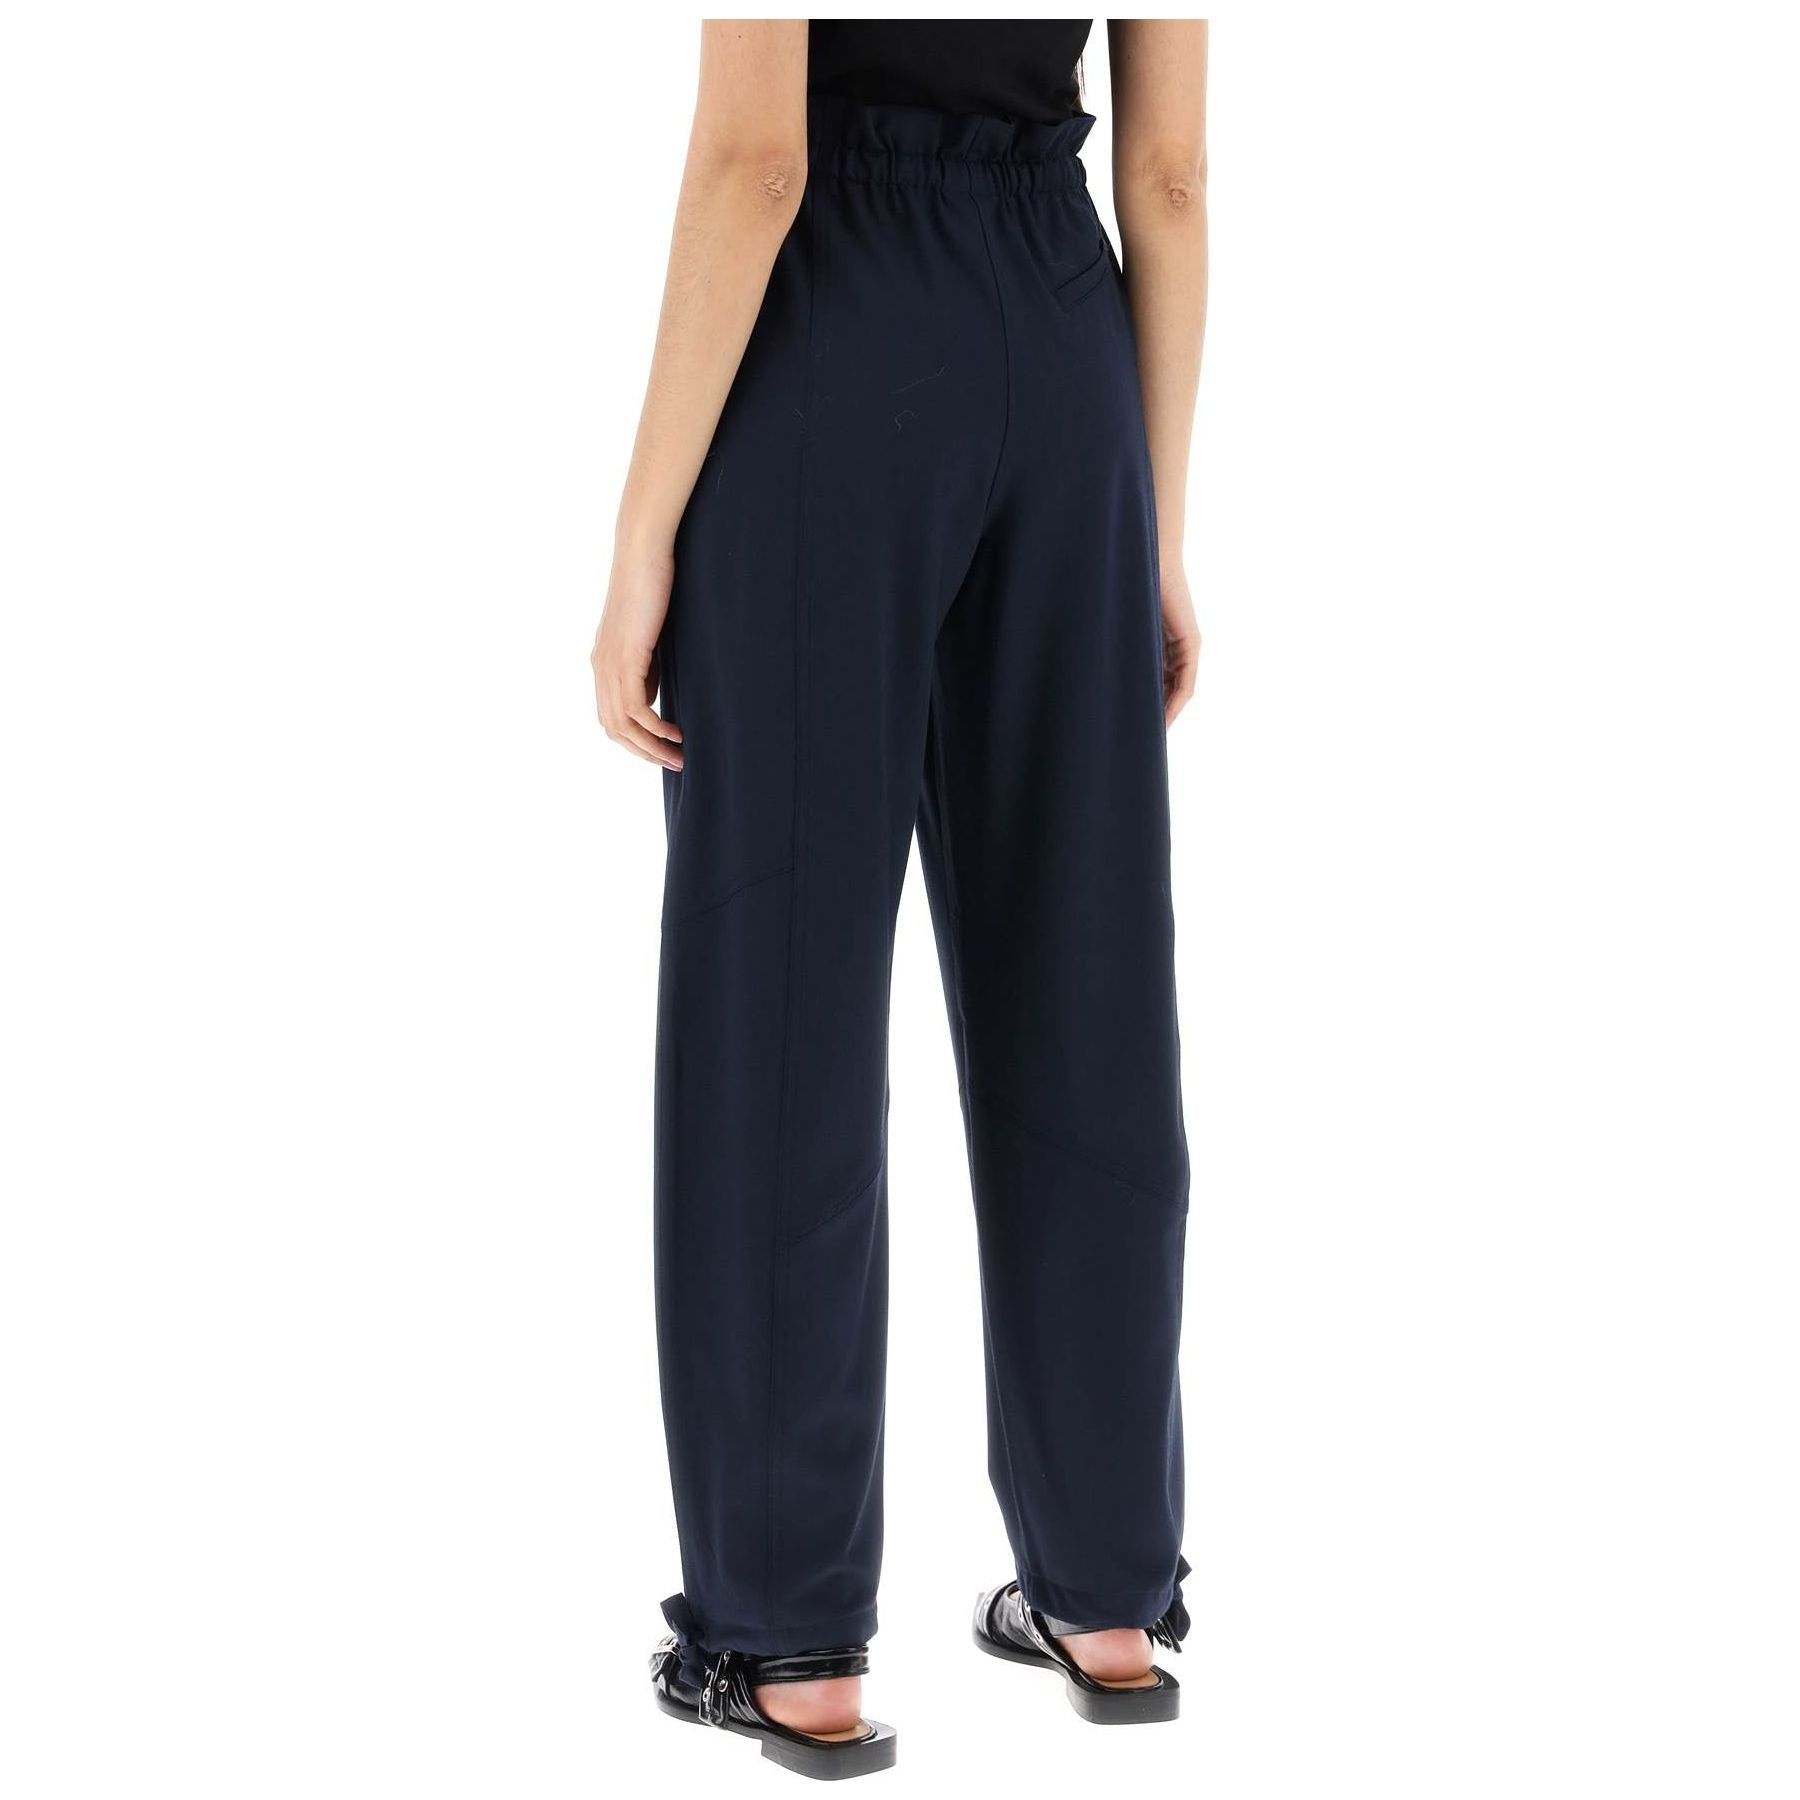 Sky Captain Elasticated High-Wasted Pants